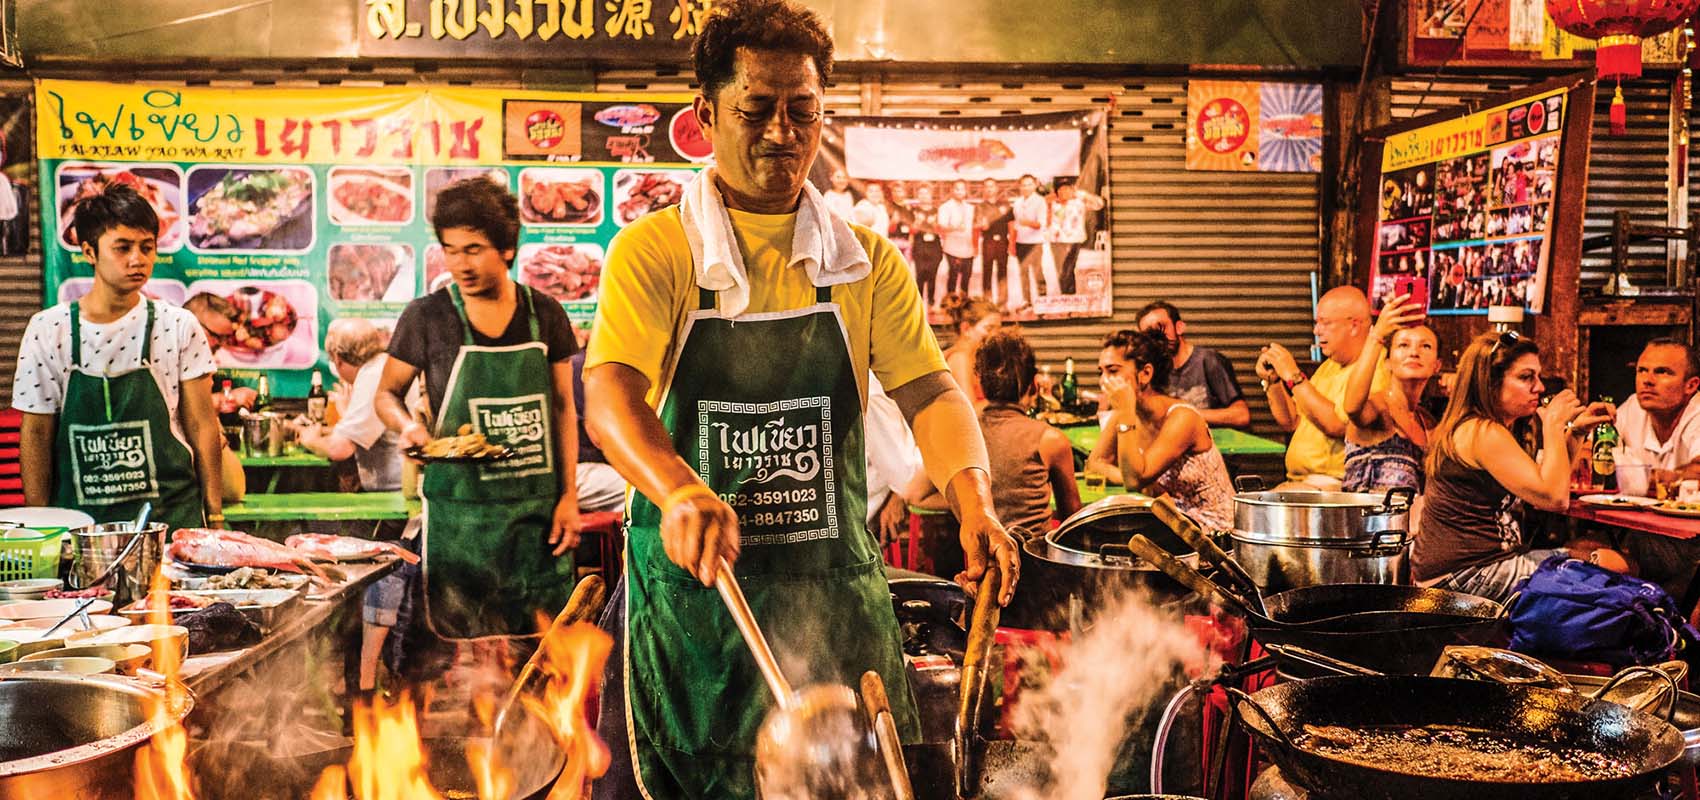 A cook preps streetside in Bangkok's Chinatown over several open flame woks